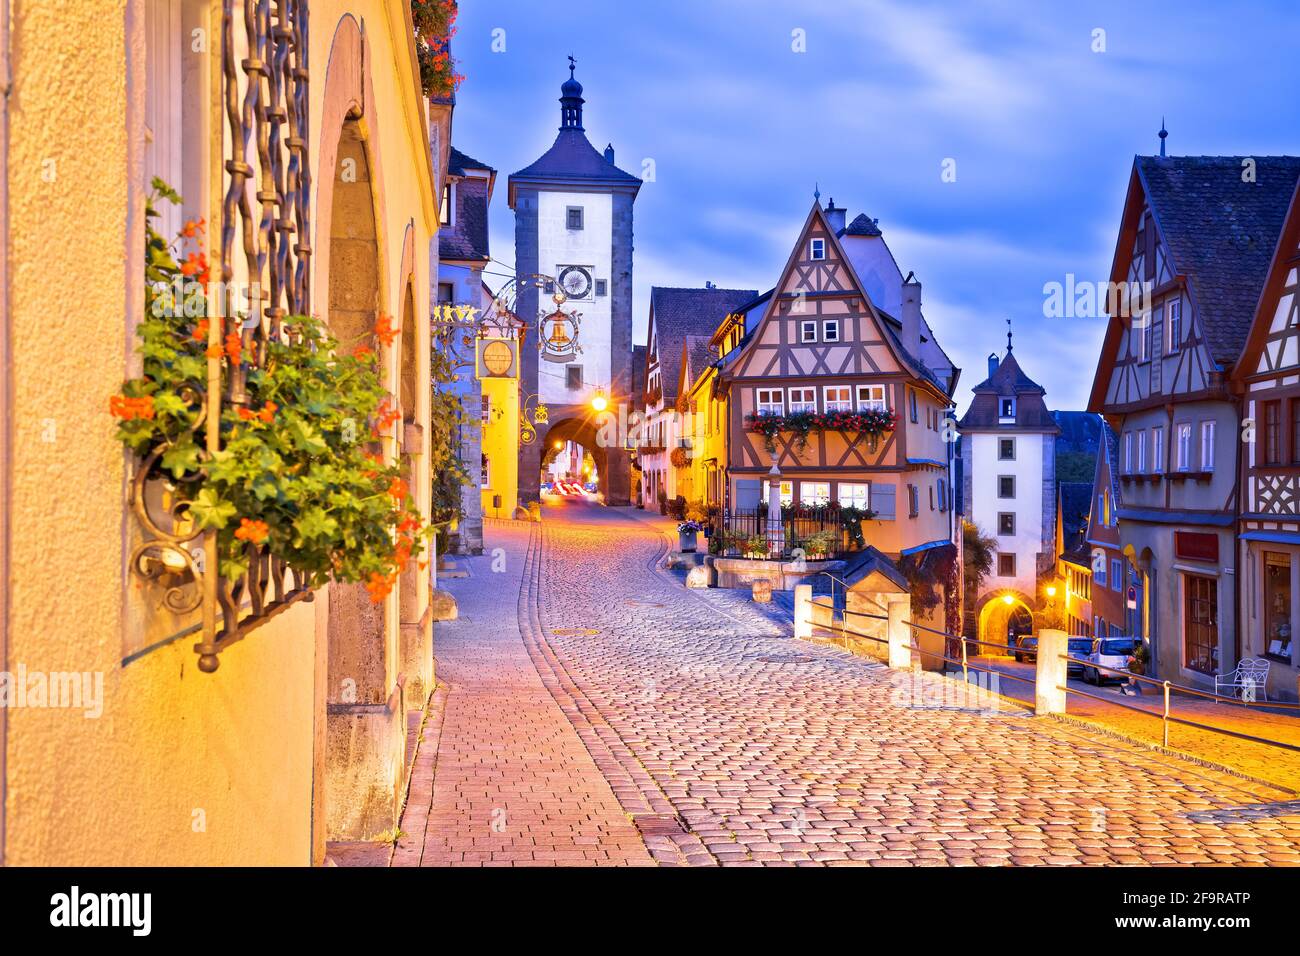 Famous Plonlein gate and cobbled street of historic town of Rothenburg ob der Tauber evening view, Romantic road of Bavaria region of Germany Stock Photo